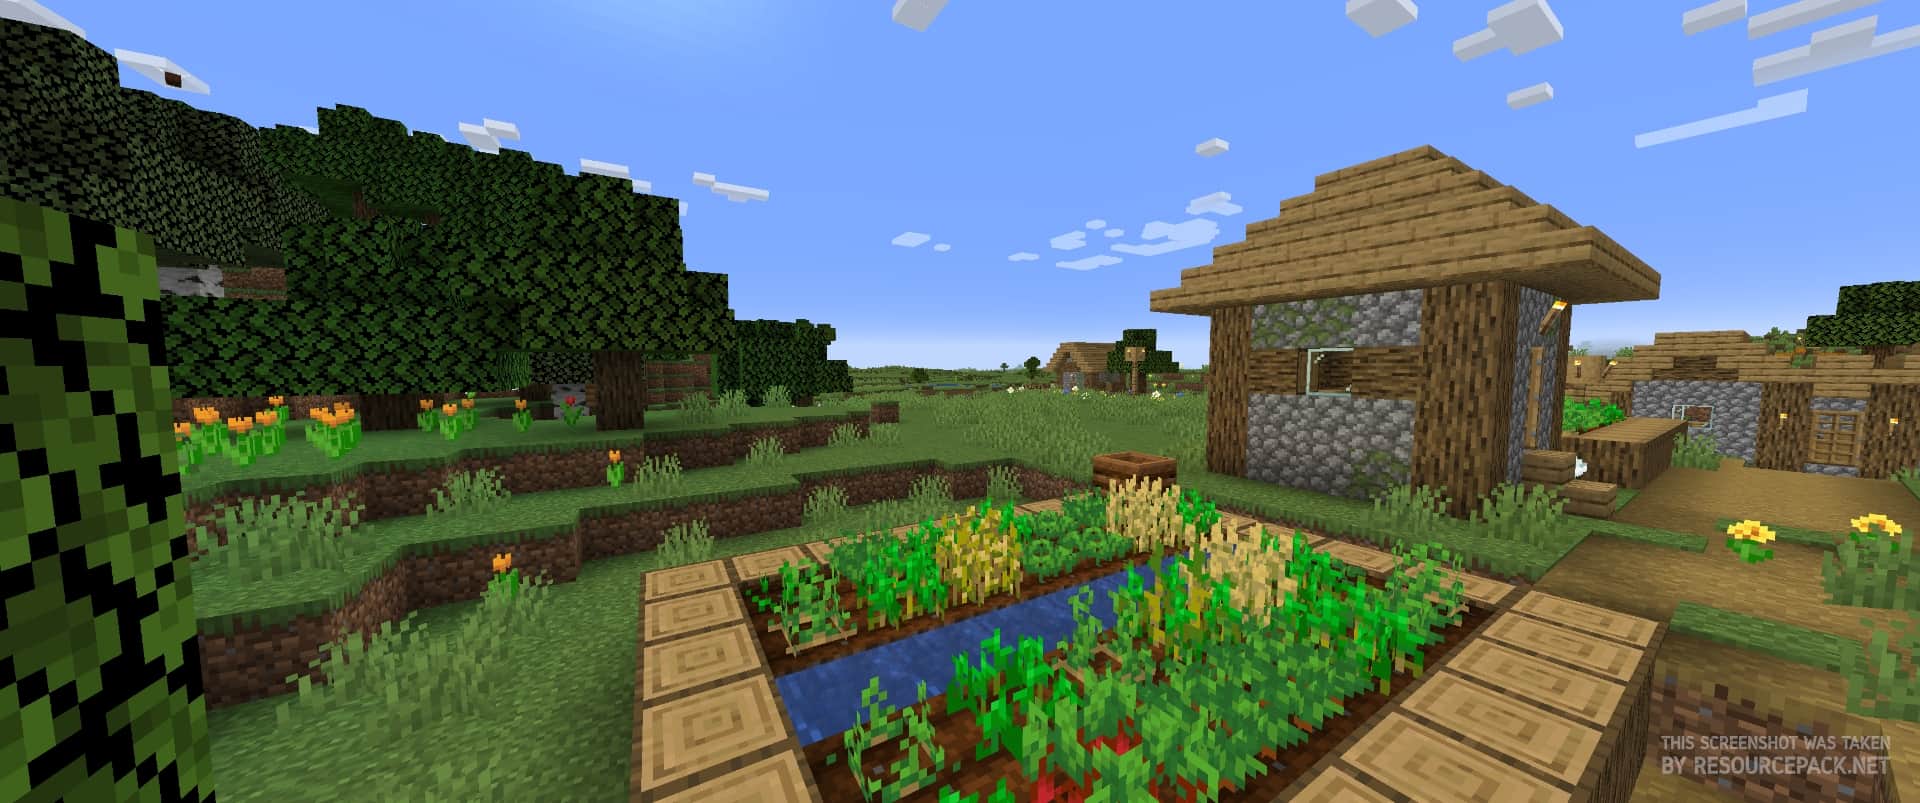 I got these shaders for Minecraft pocket edition similar to ray tracing and  so I took a picture of a villager house I modified with the mod : r/ Minecraft